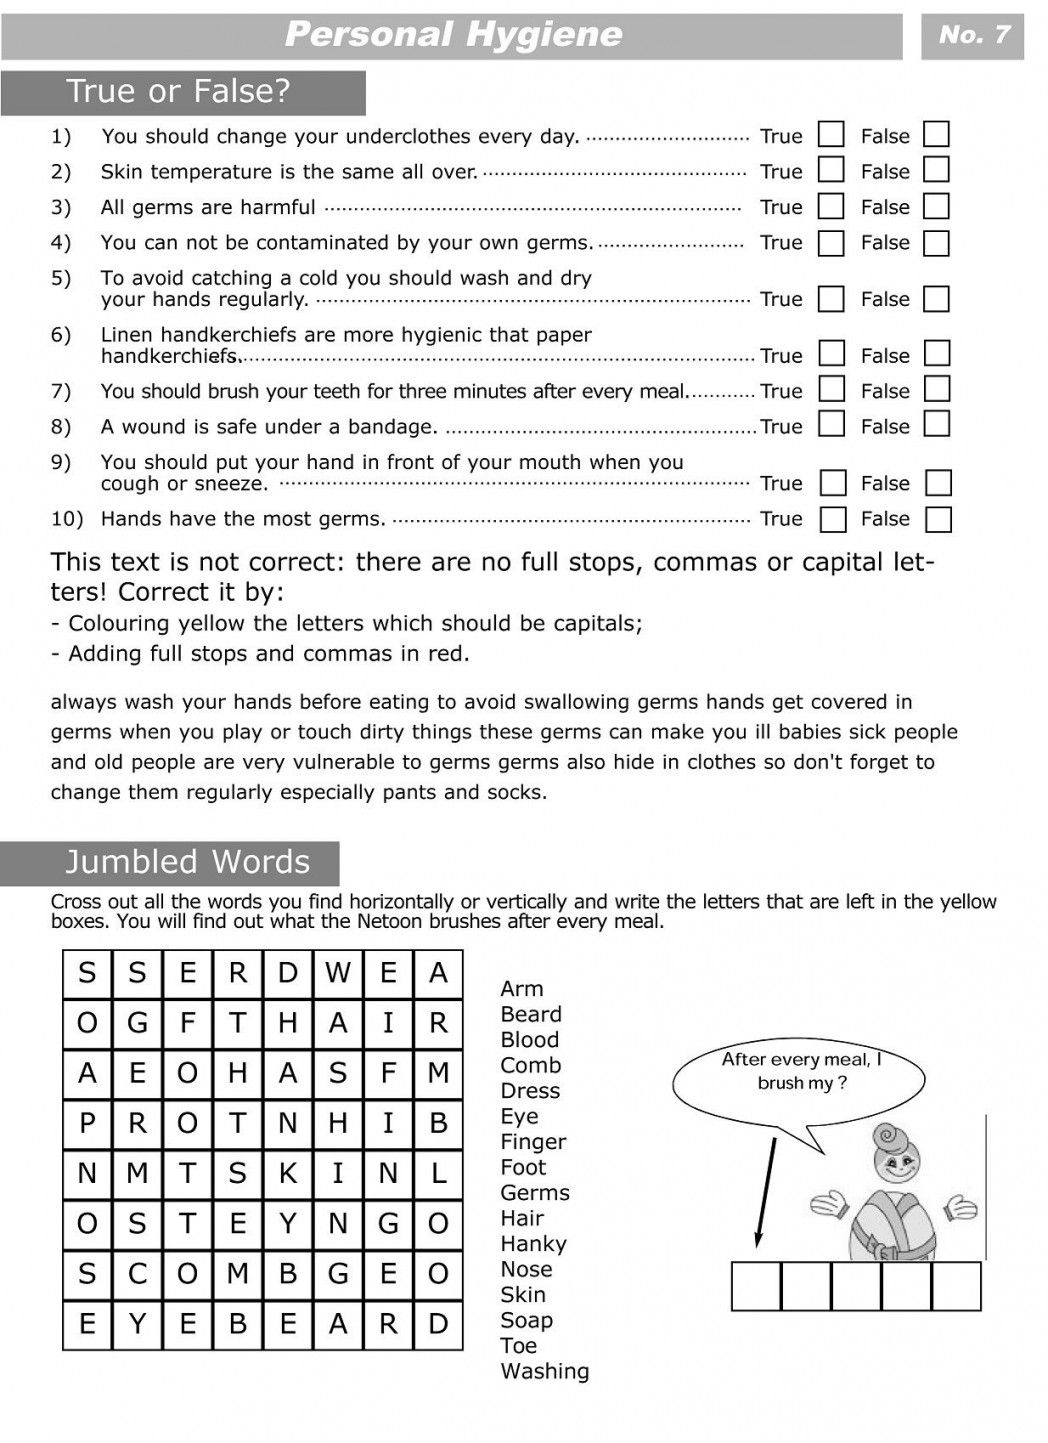 Free Printable Life Skills Worksheets For Adults | Lostranquillos | Free Printable Life Skills Worksheets For Adults